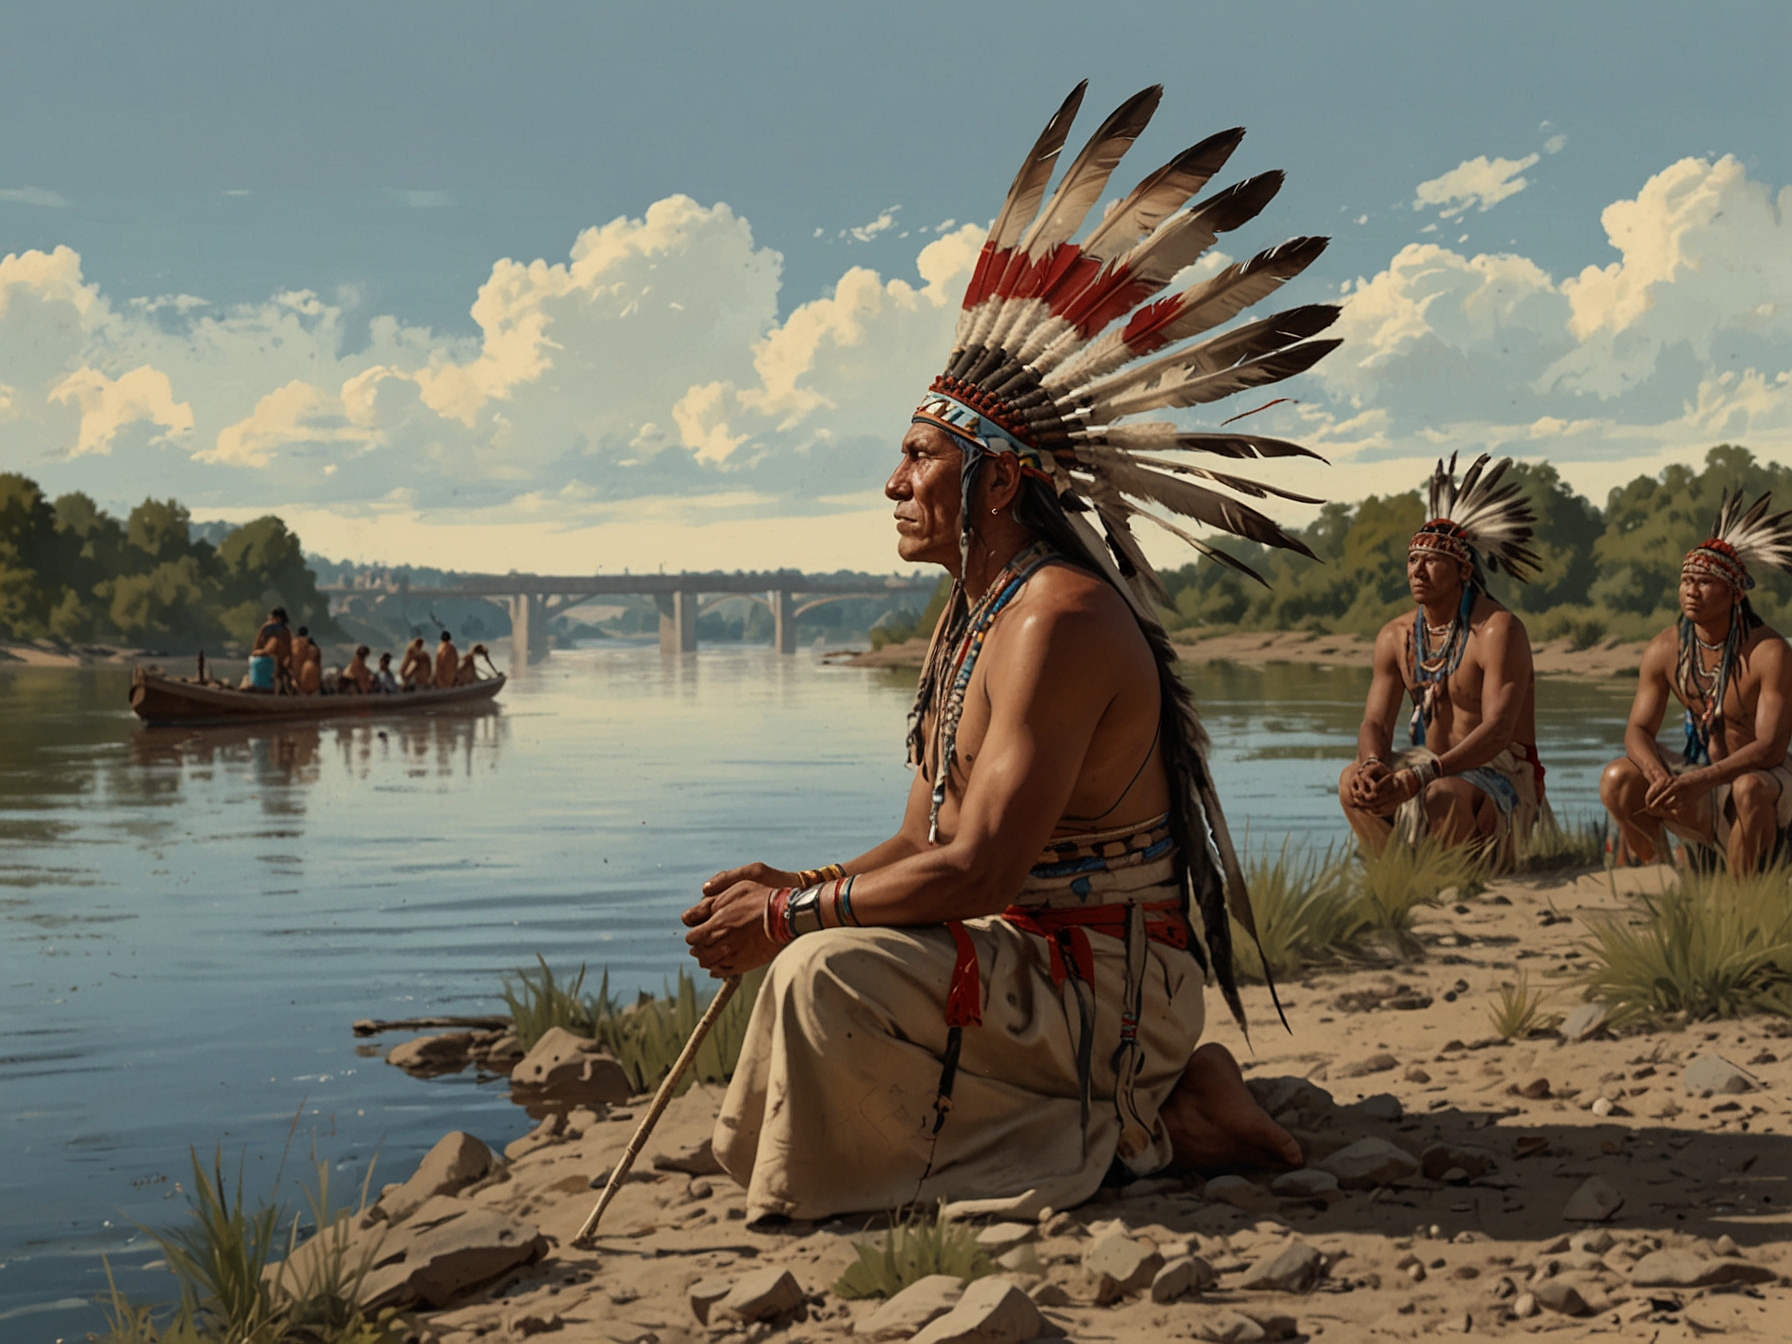 Members of the Winnebago Tribe of Nebraska gather along the banks of the Missouri River, performing a traditional ceremony to honor the return of their ancestral lands.